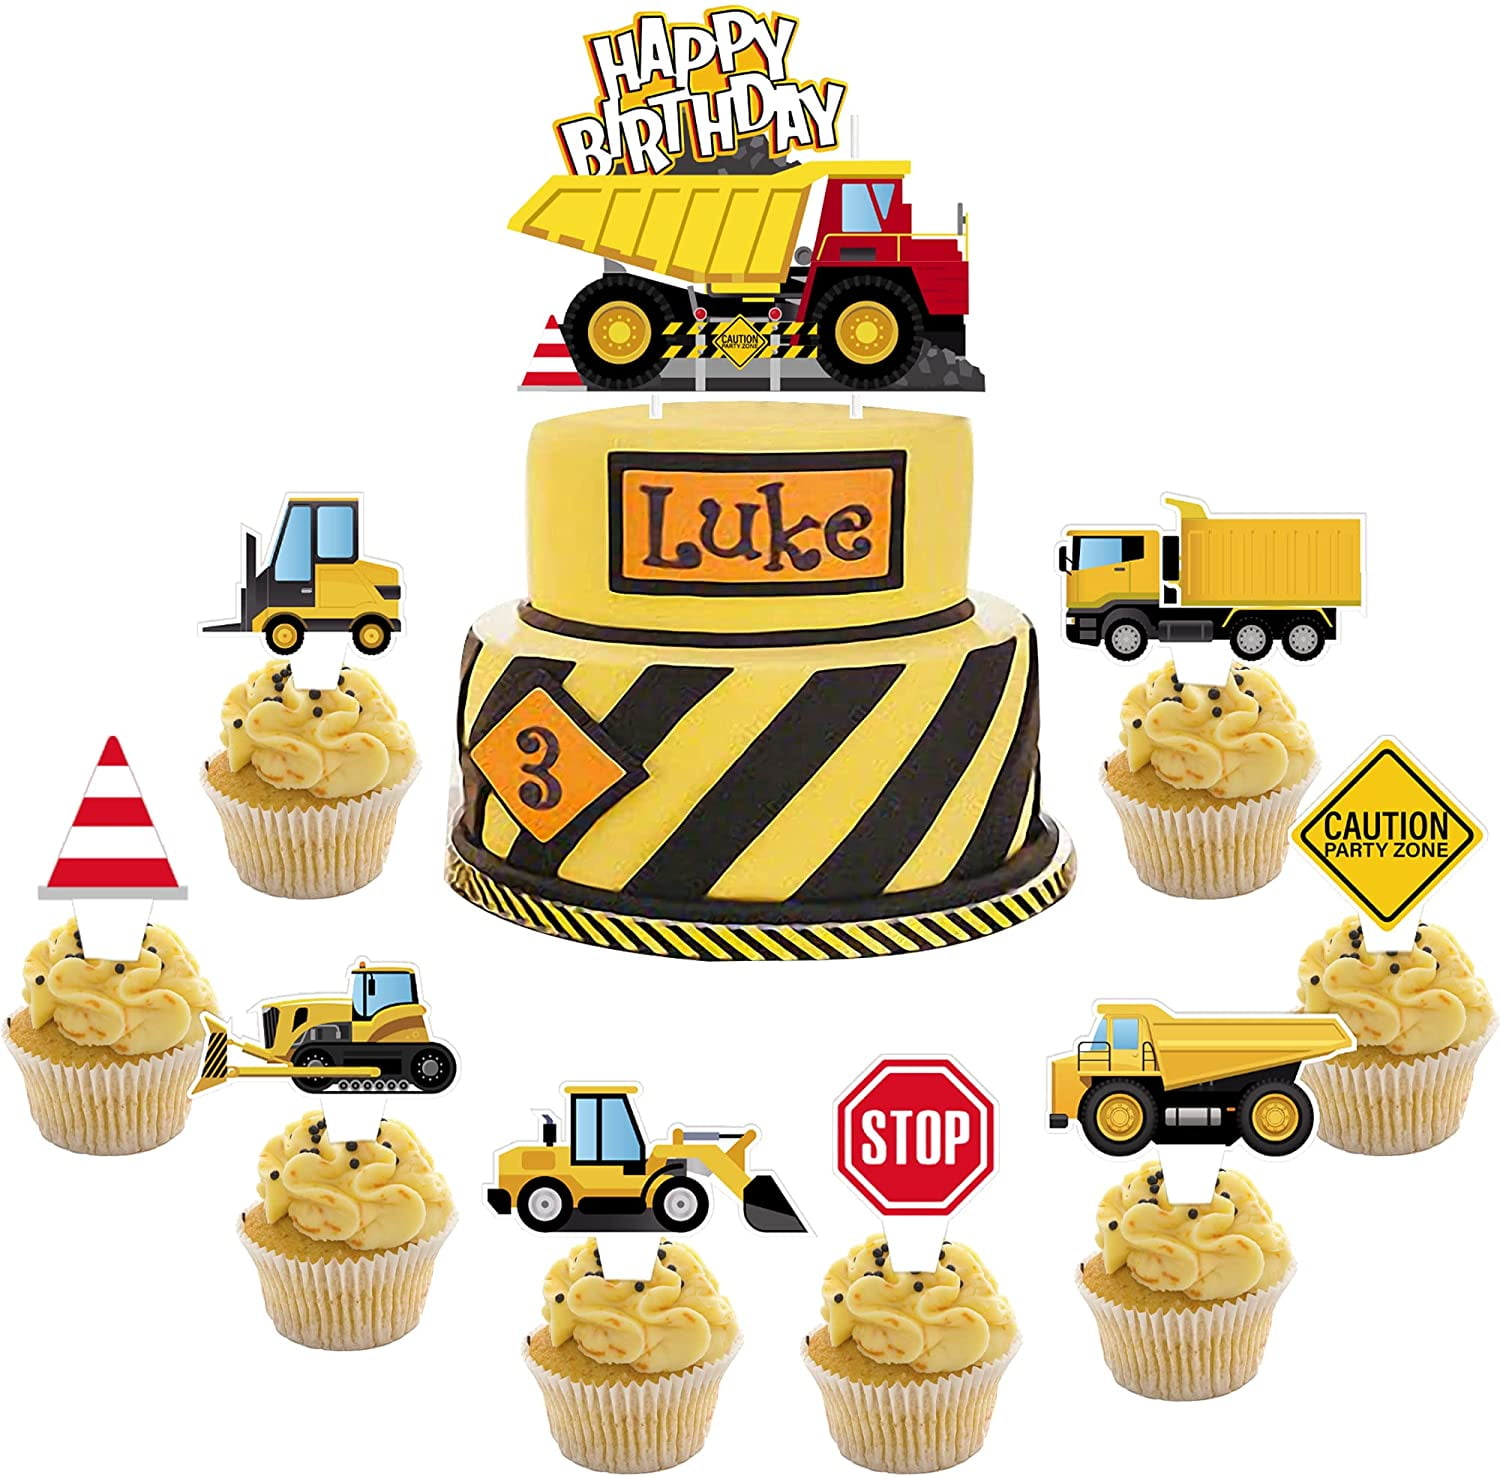 PuPuFly Excavator 3rd Birthday Cake Topper for Engineering Construction  Theme Decoration ,Kids Boy 3 Year Happy Party ââ‚¬â€ 1 (PuPuFlya53214) :  Amazon.in: Toys & Games